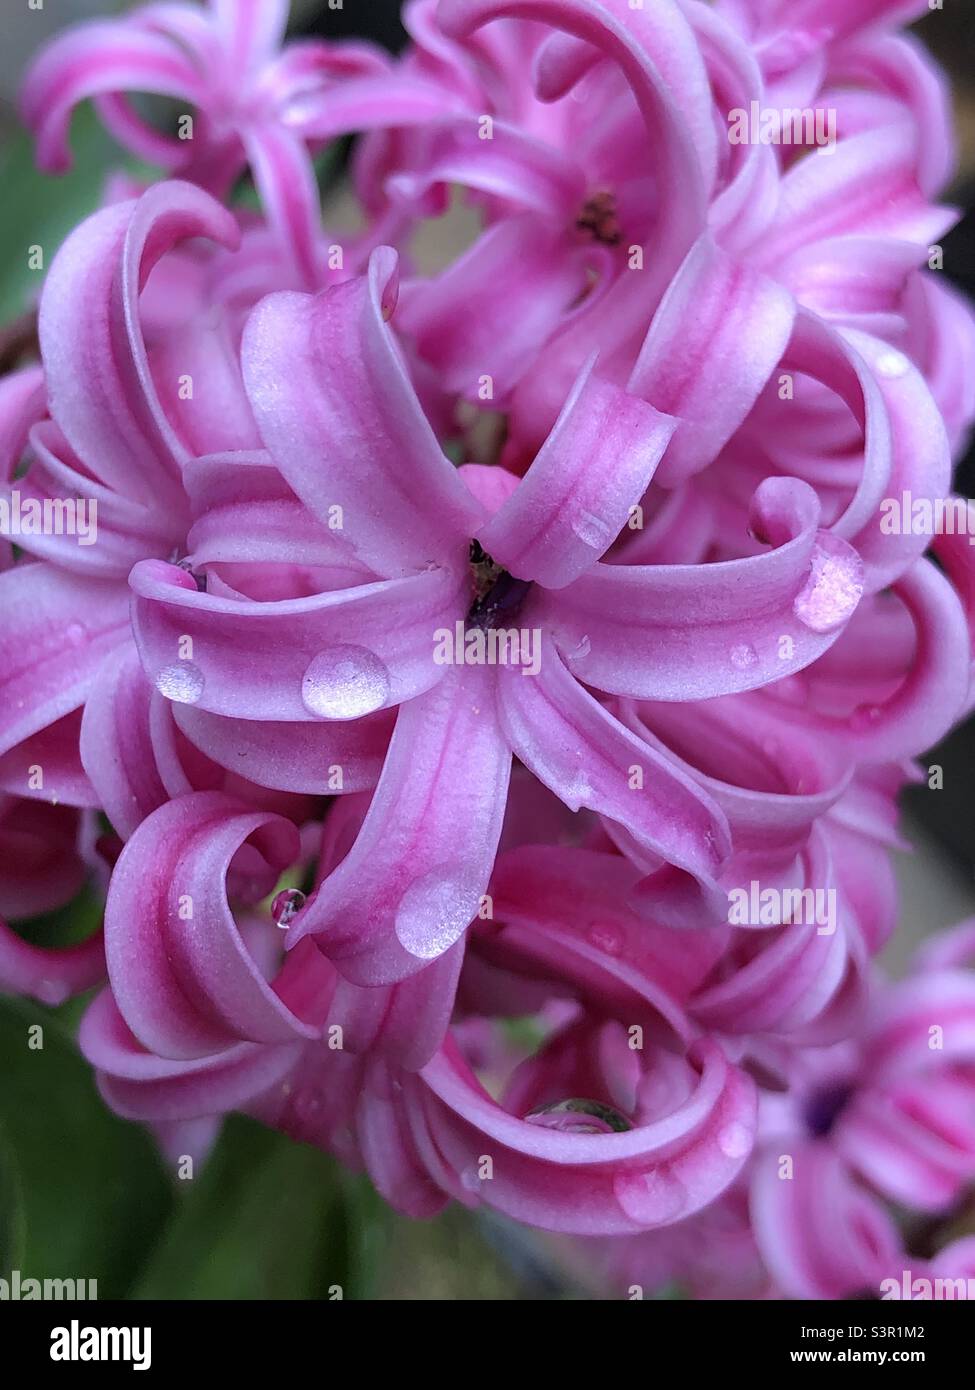 Macro photo of a pink Hyacinth with water droplets on the petals. Stock Photo